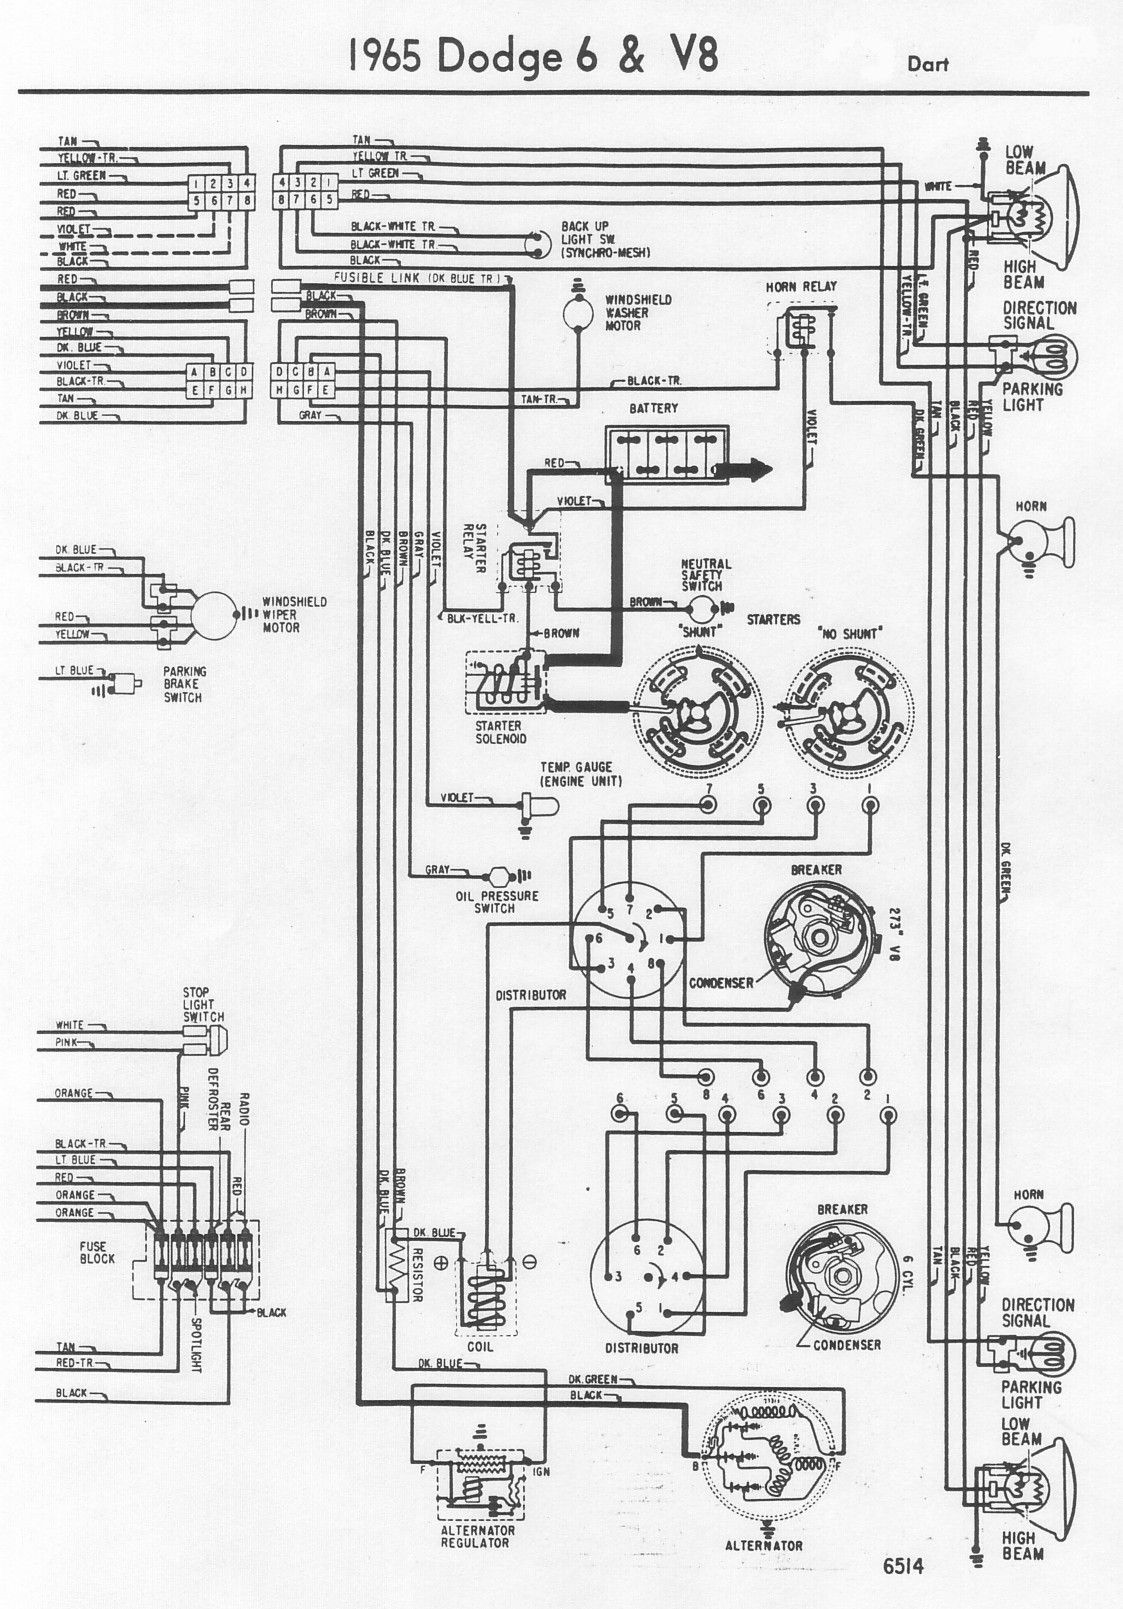 wiring diagram for 1965 dodge truck d200